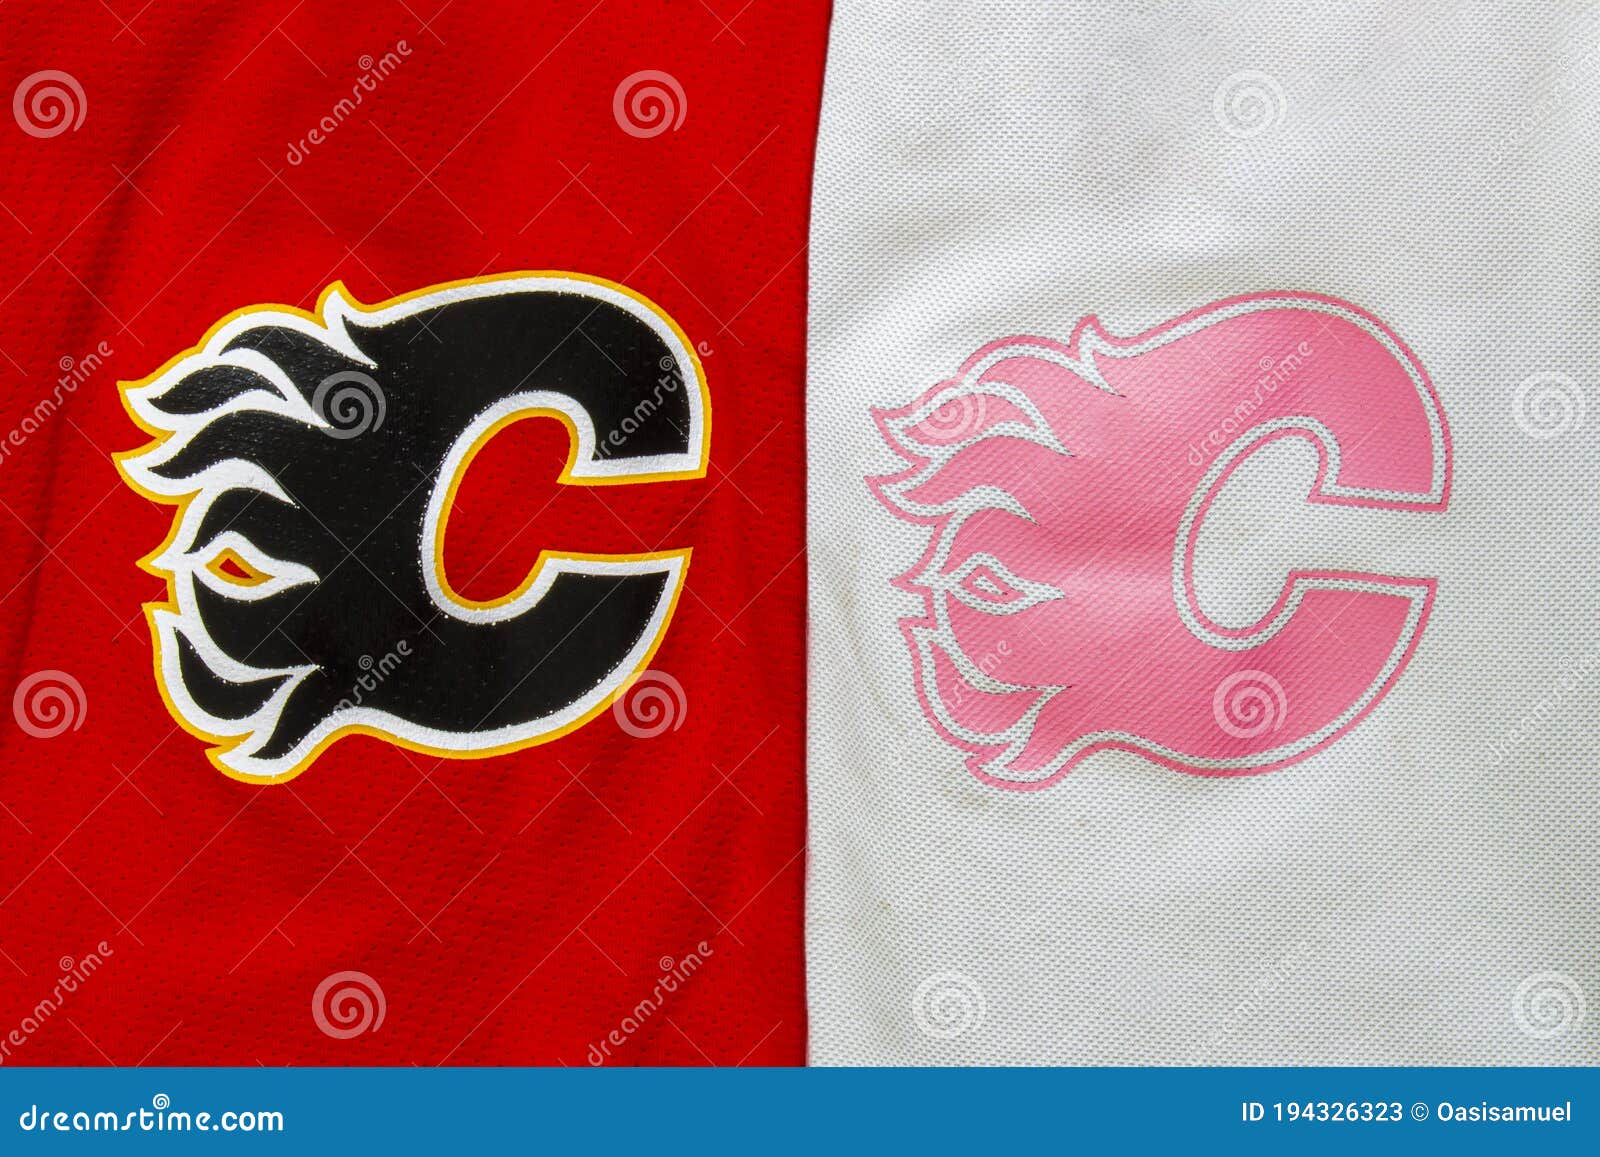 A Close Up To a NHL Calgary Flames Logo on a Red and Pink Hockey